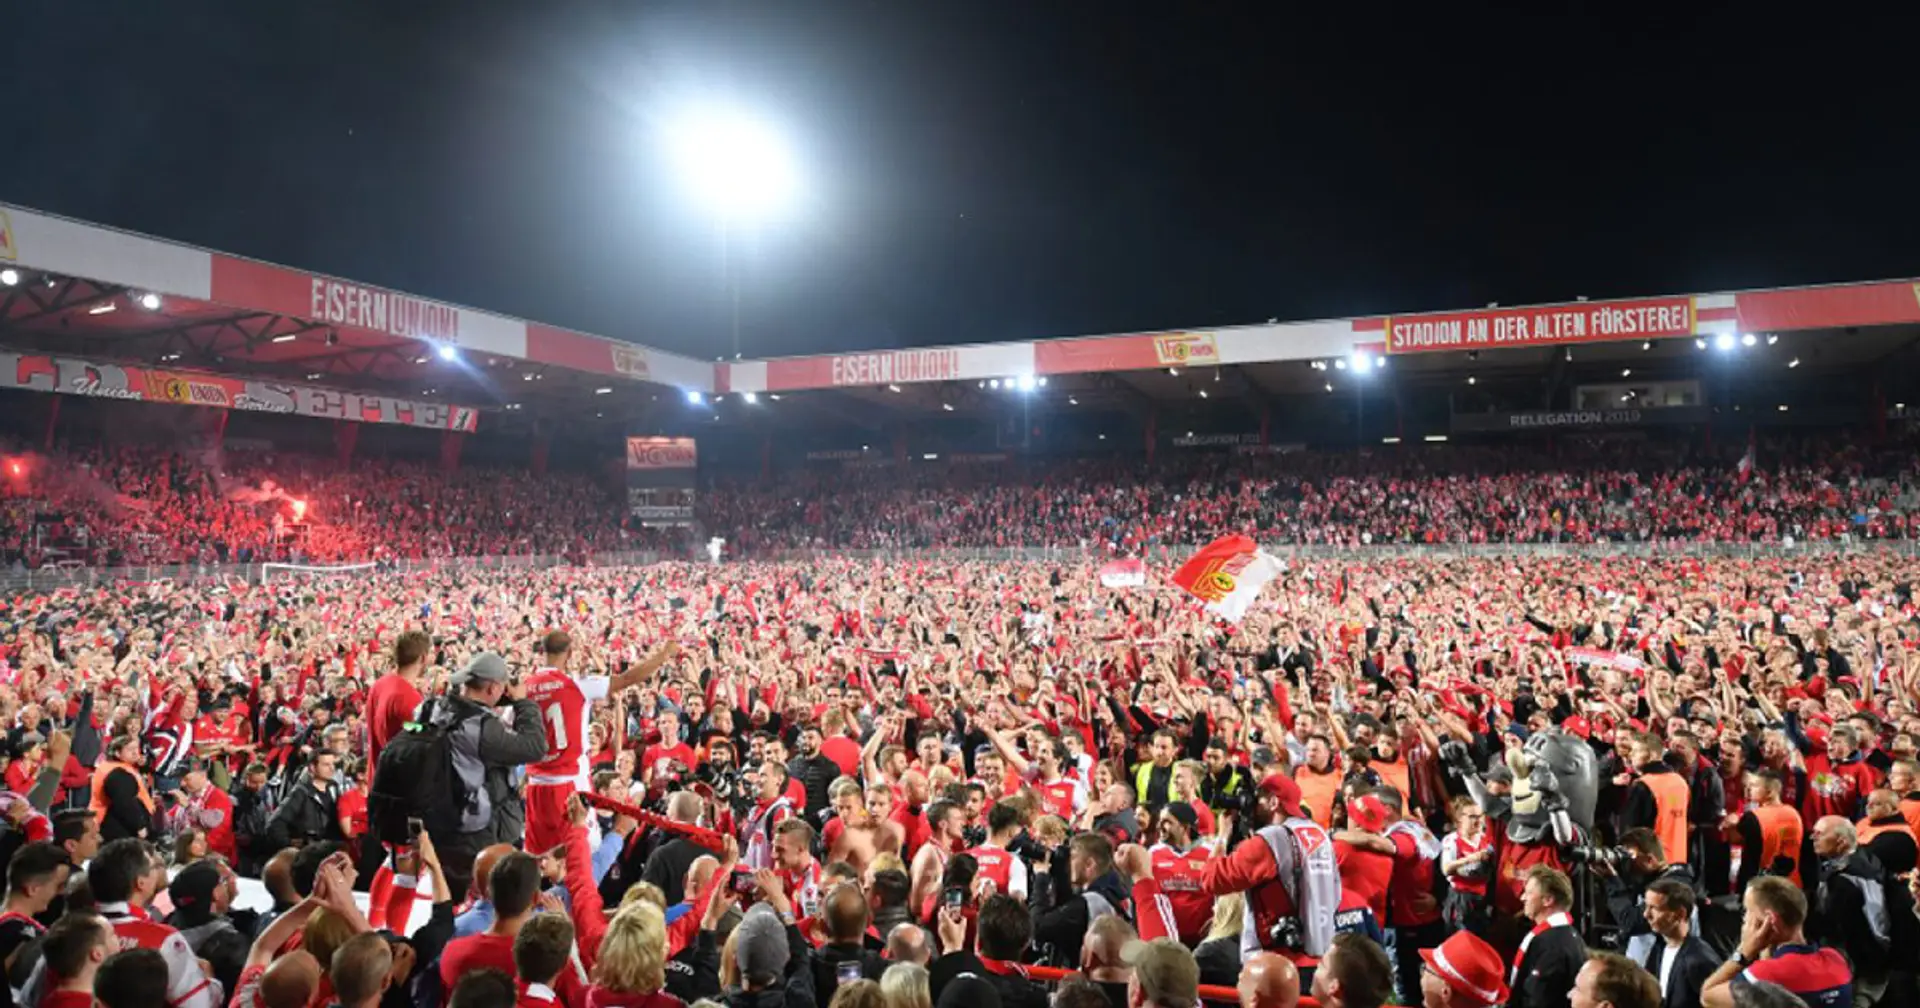 Union Berlin planning to test all 22,012 ticket holders for coronavirus on matchdays in strive for full home ground